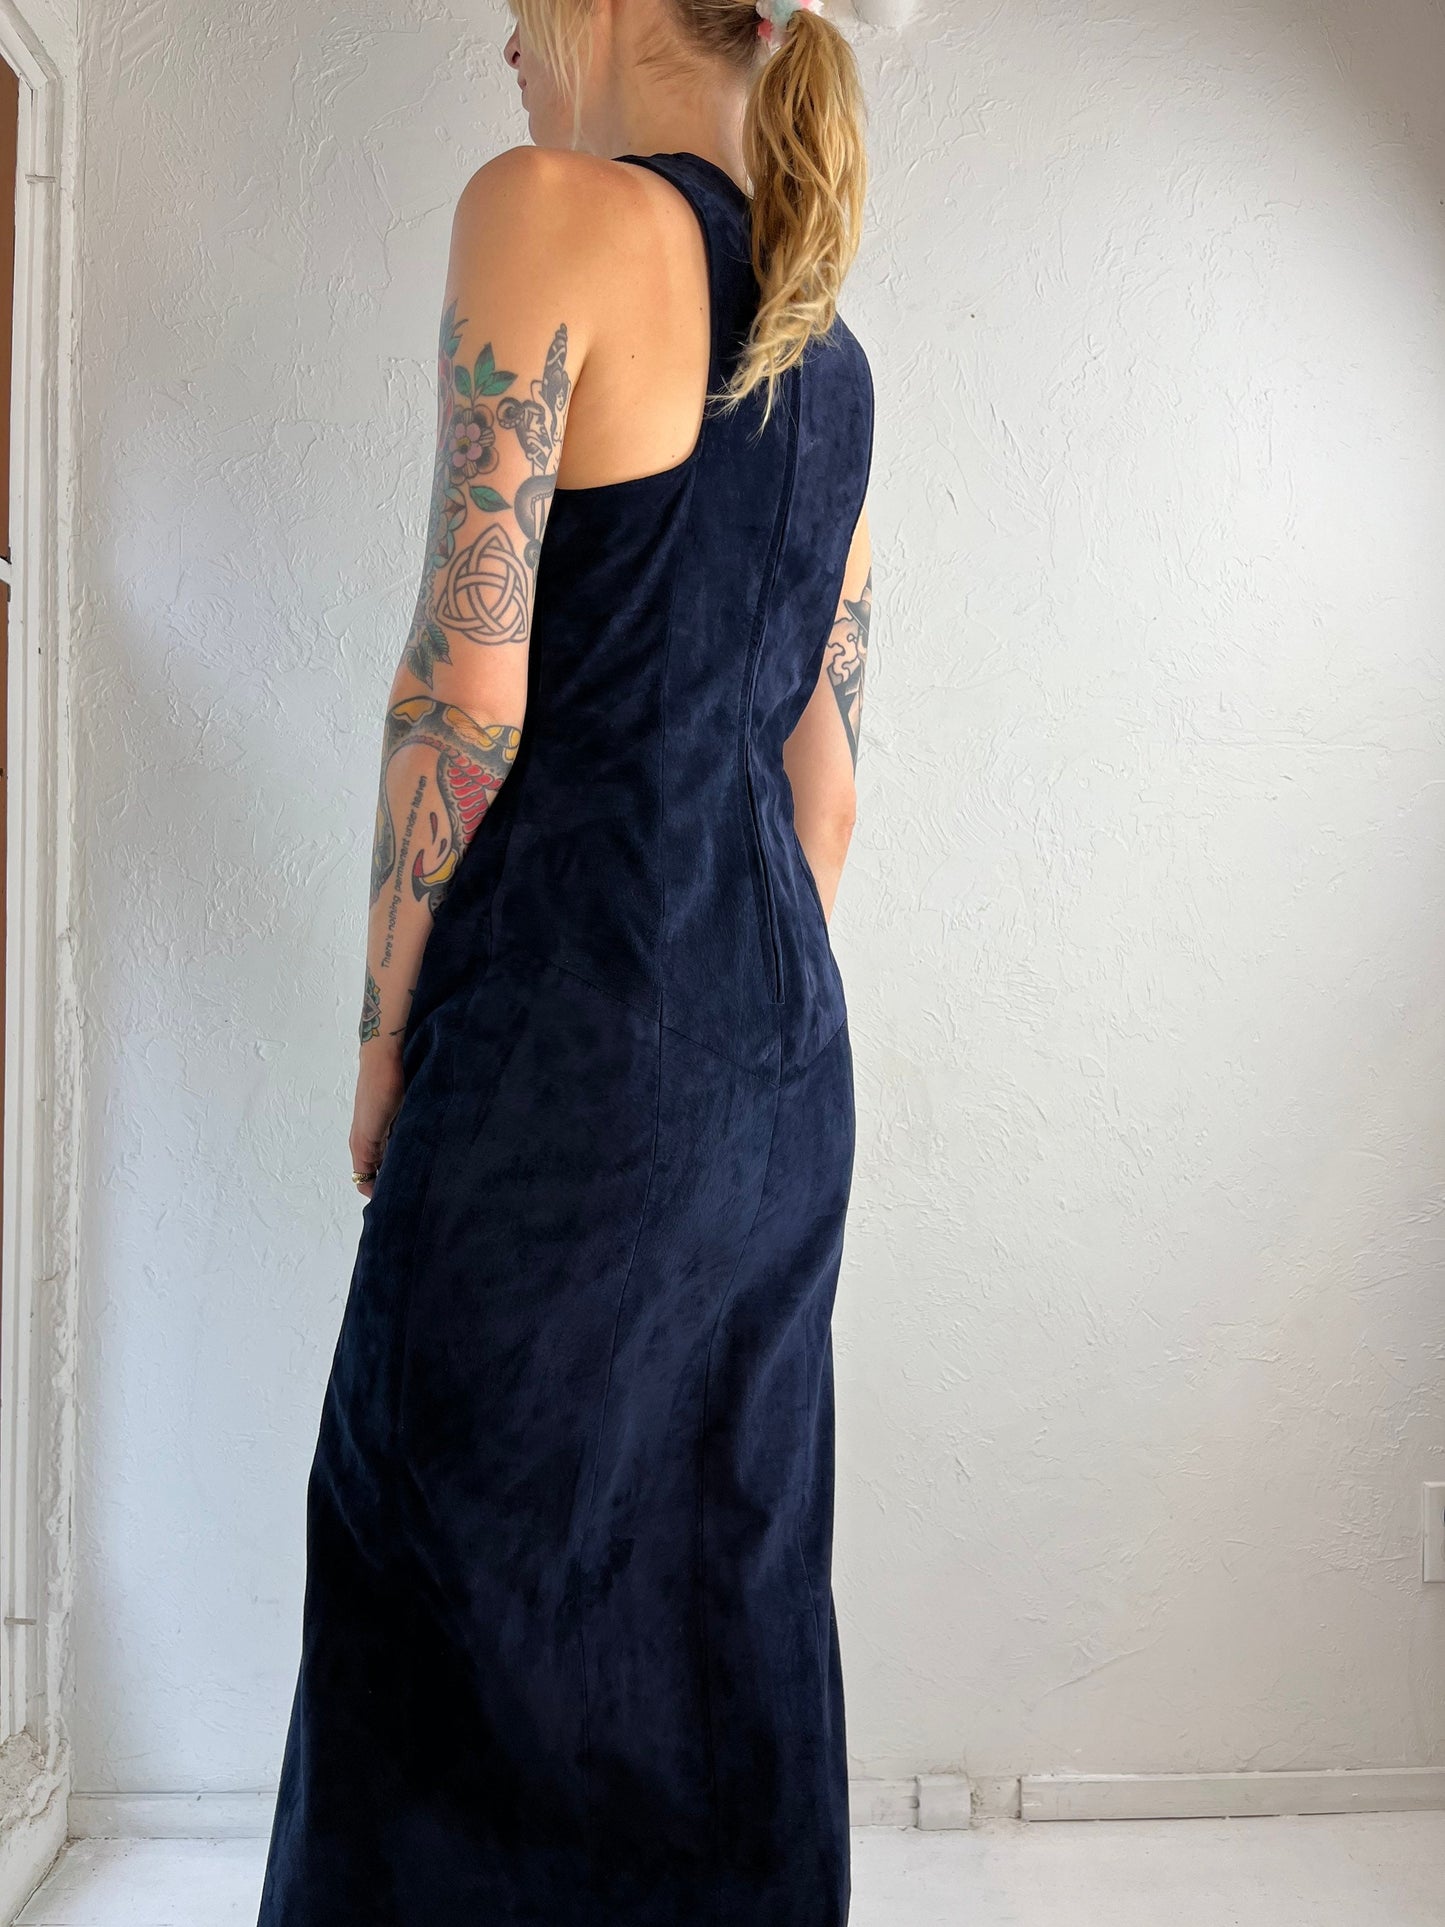 90s 'Danier' Navy Blue Suede Leather Form Fitting Dress / XS